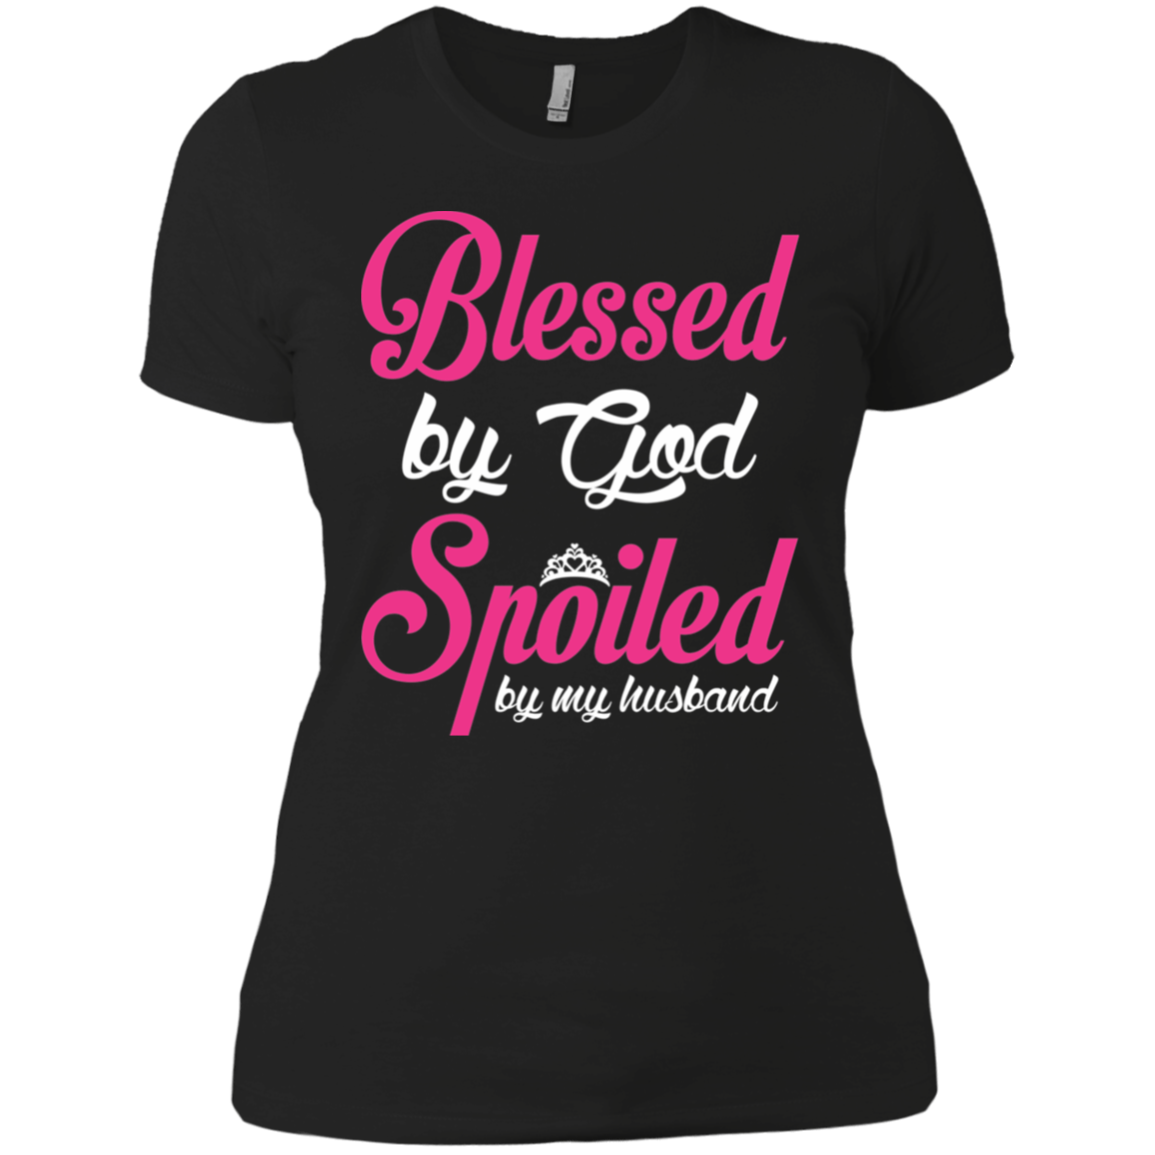 Blessed By God - Spoiled By My Husband Ladies T-Shirt